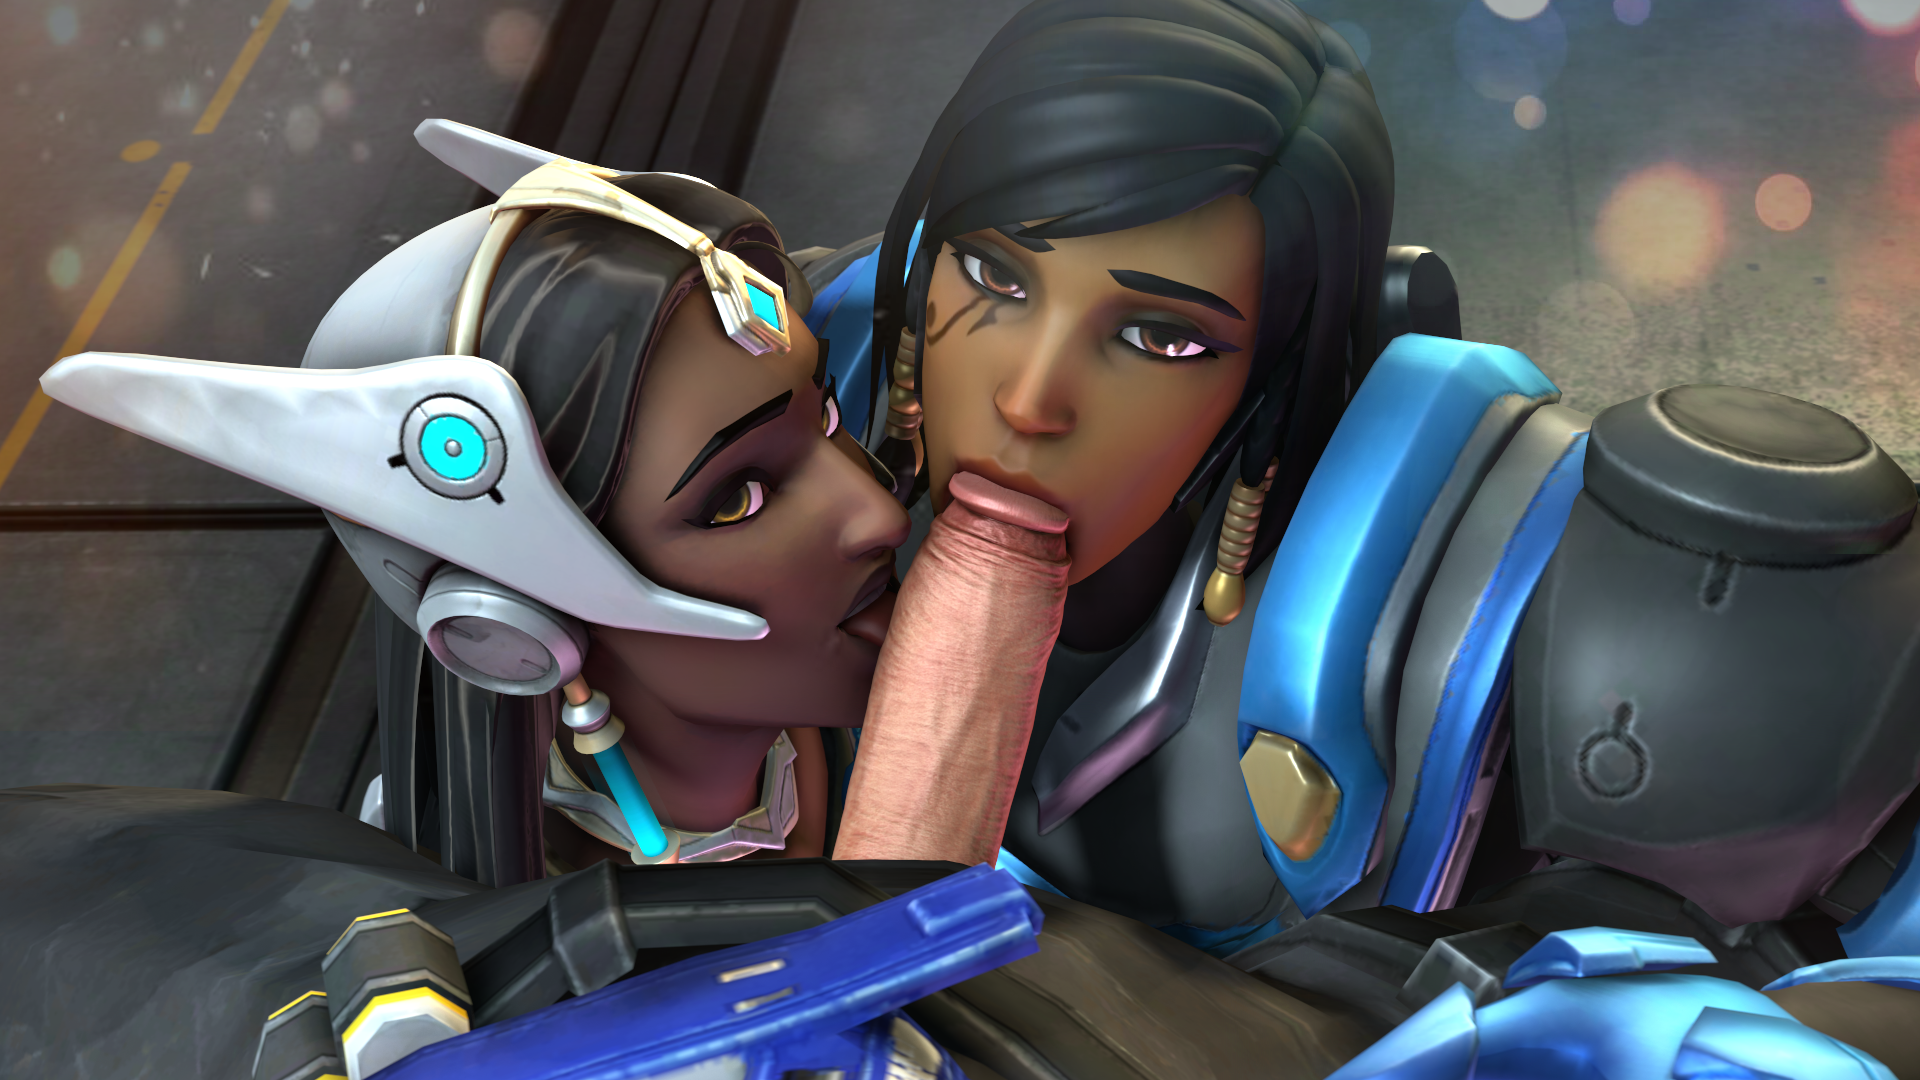 Rooster recommendet symmetra anal fuck overwatch